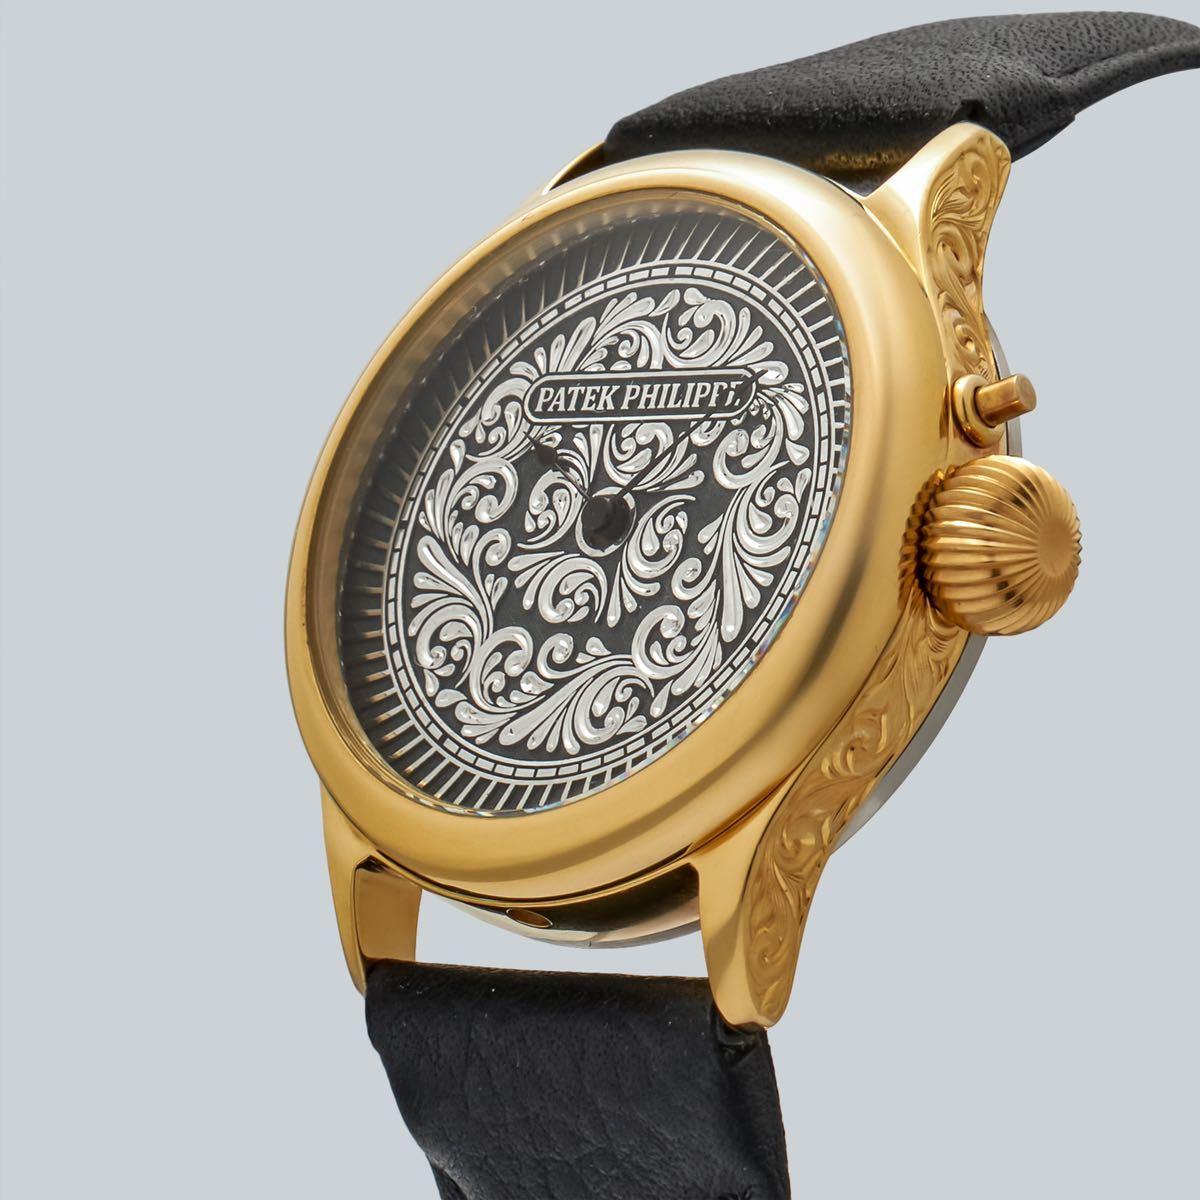 Marriage watch Patek Philippe 40mm men's watch with a pocket watch Manual winding skeleton - Murphy Johnson Watches Co.